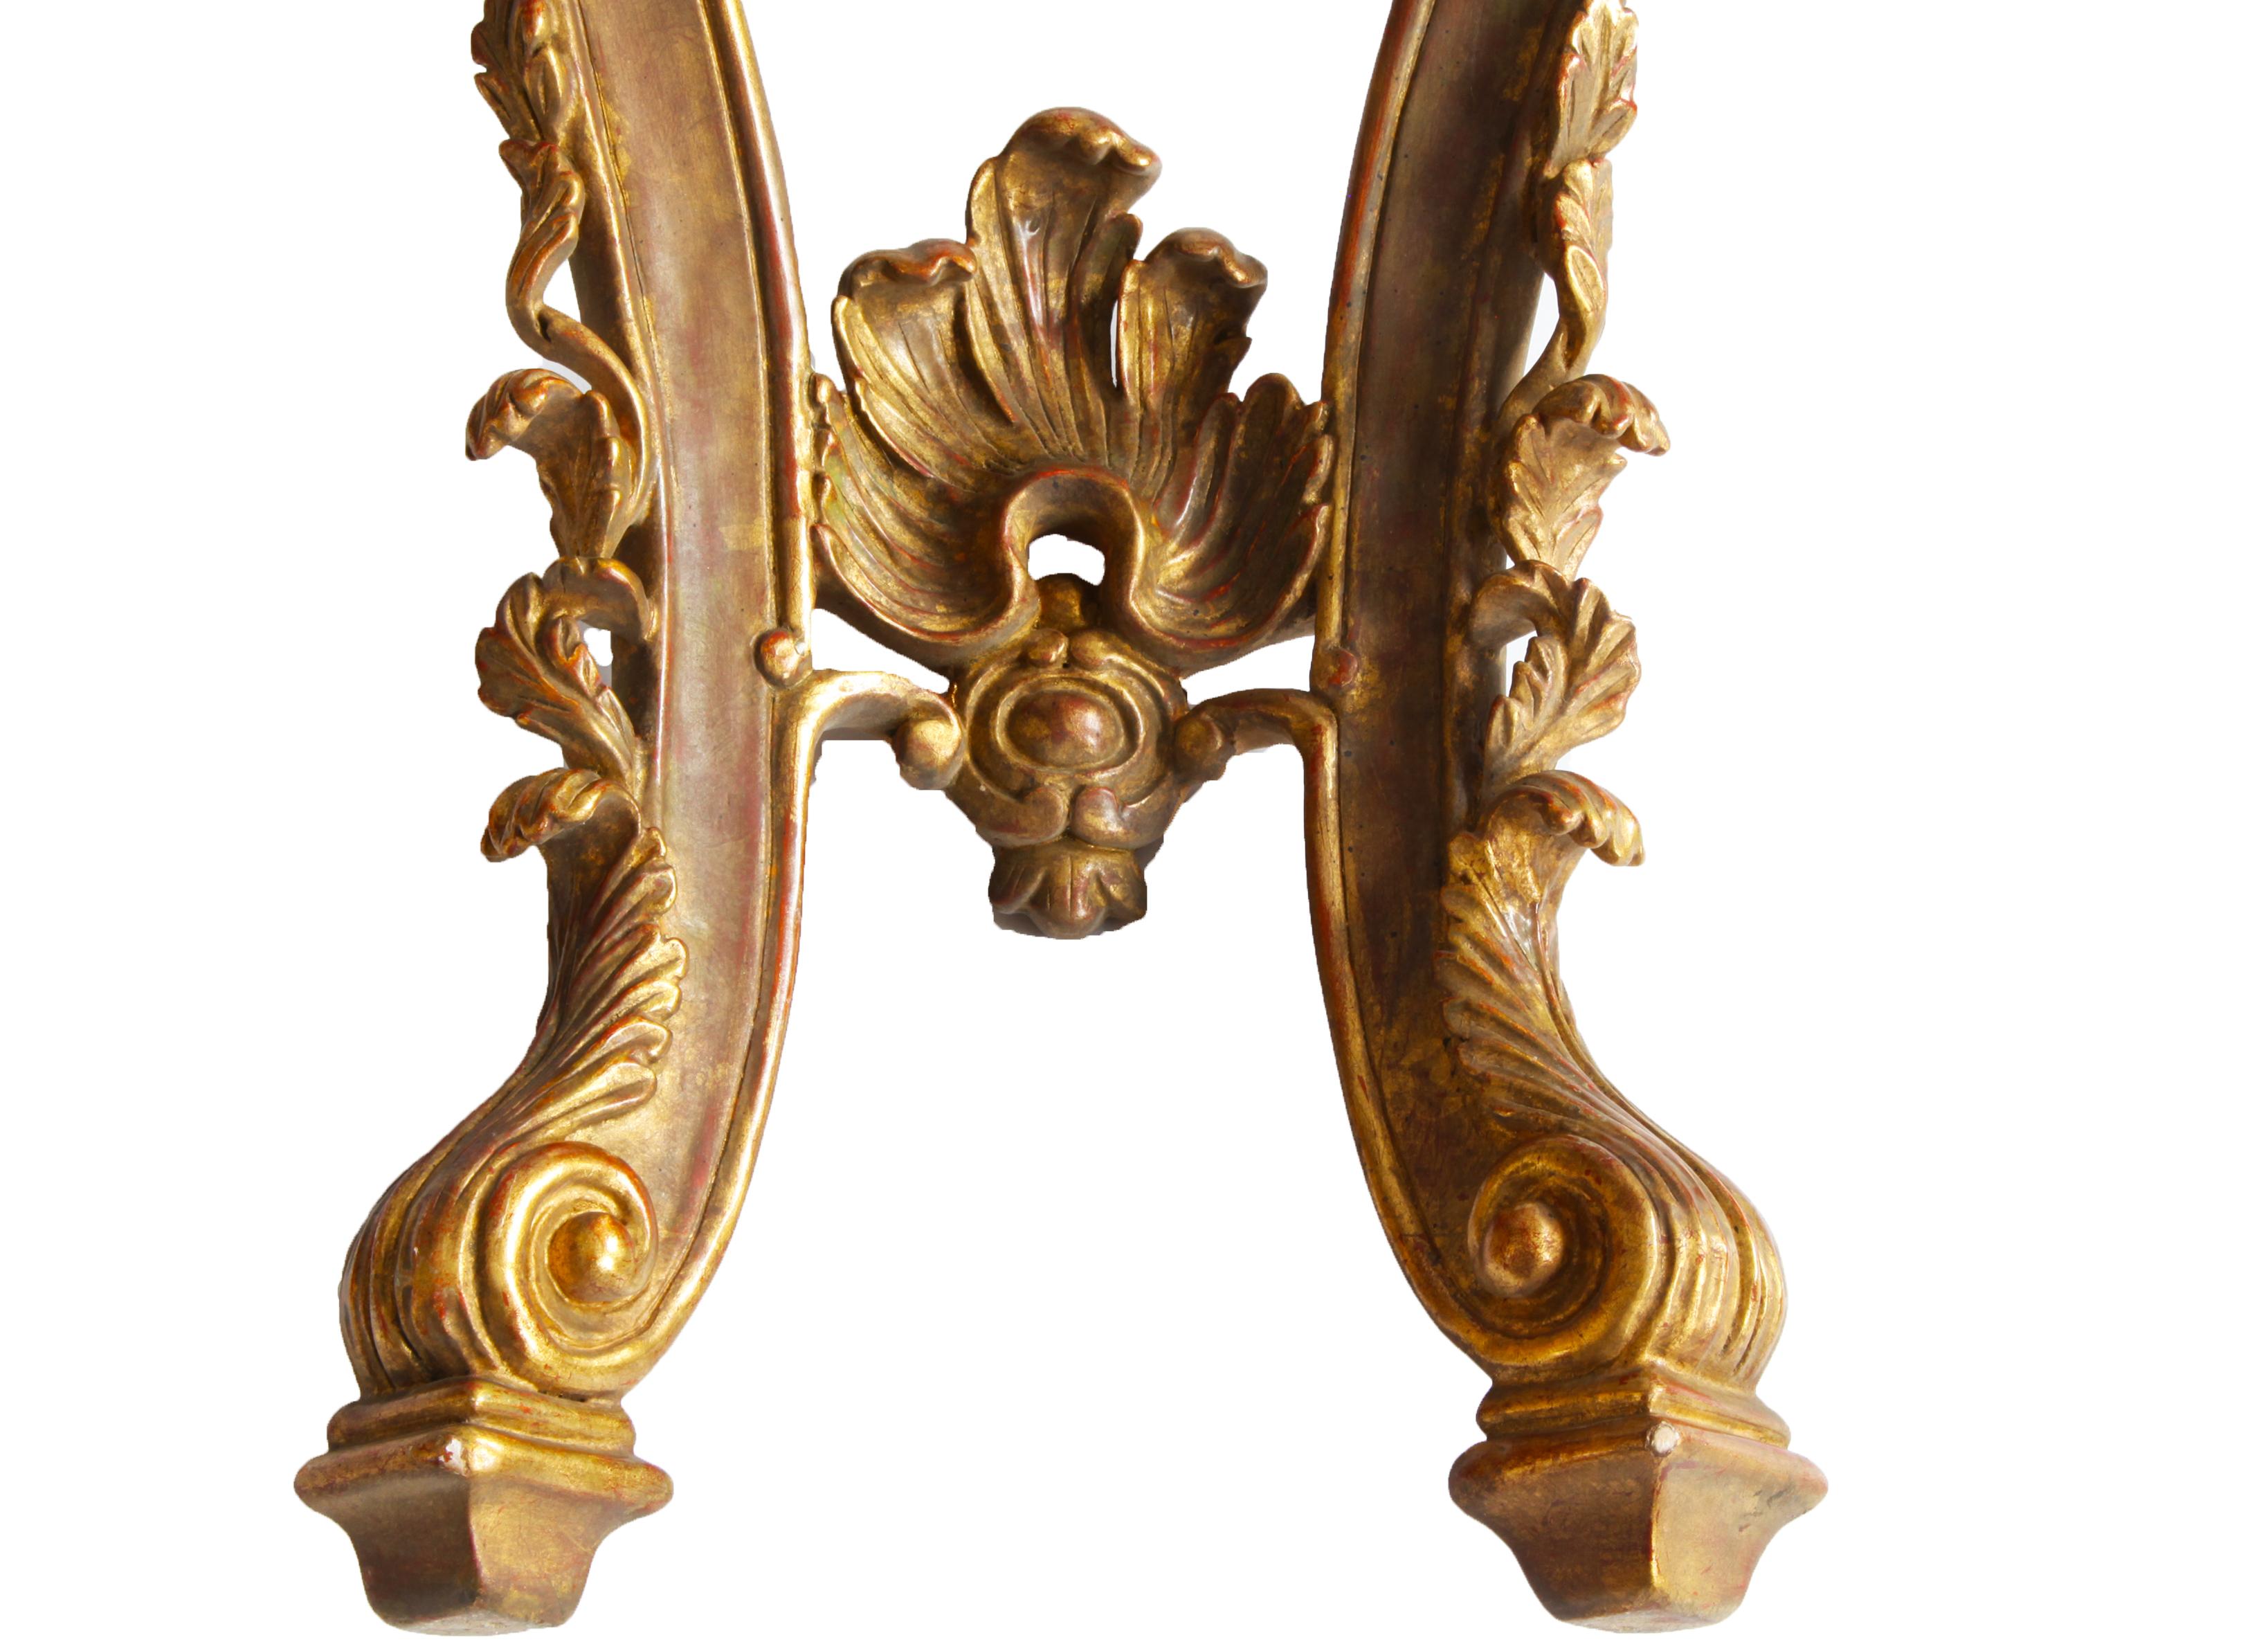 Contemporary Pair of Rococo Style Giltwood Consoles Reproduced by La Maison London